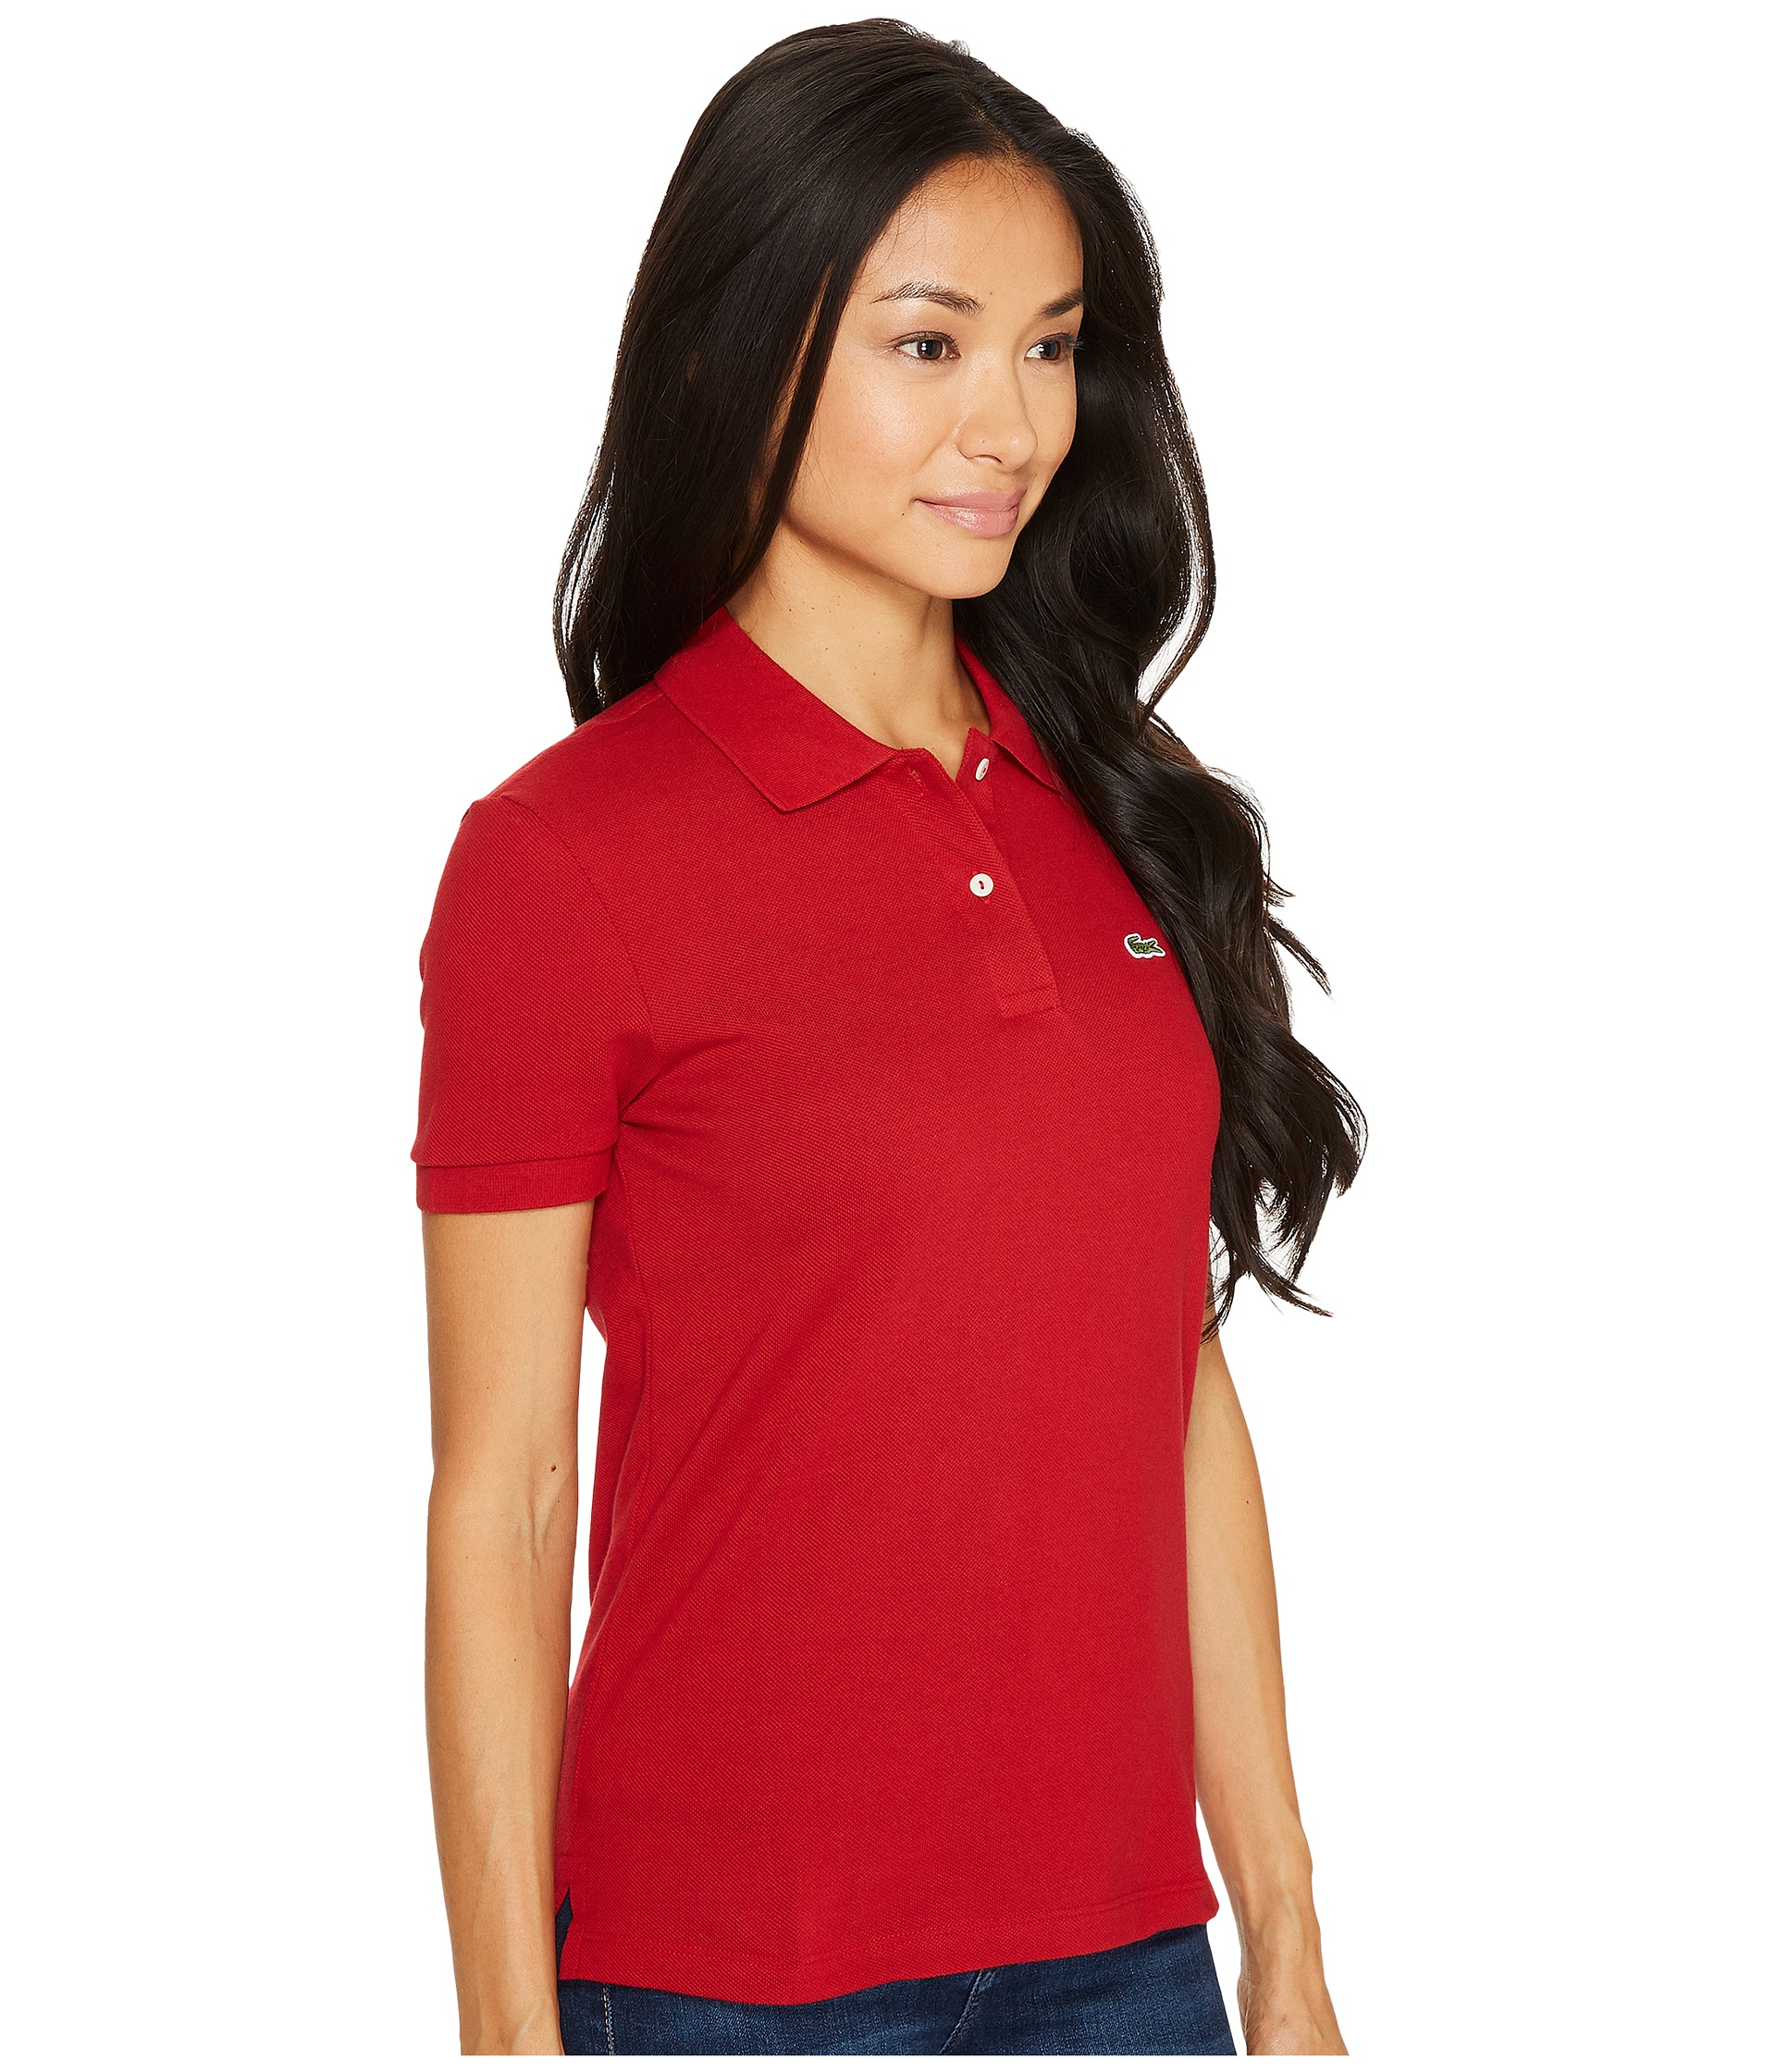 Lacoste Short Sleeve Two-Button Classic Fit Pique Polo at Zappos.com